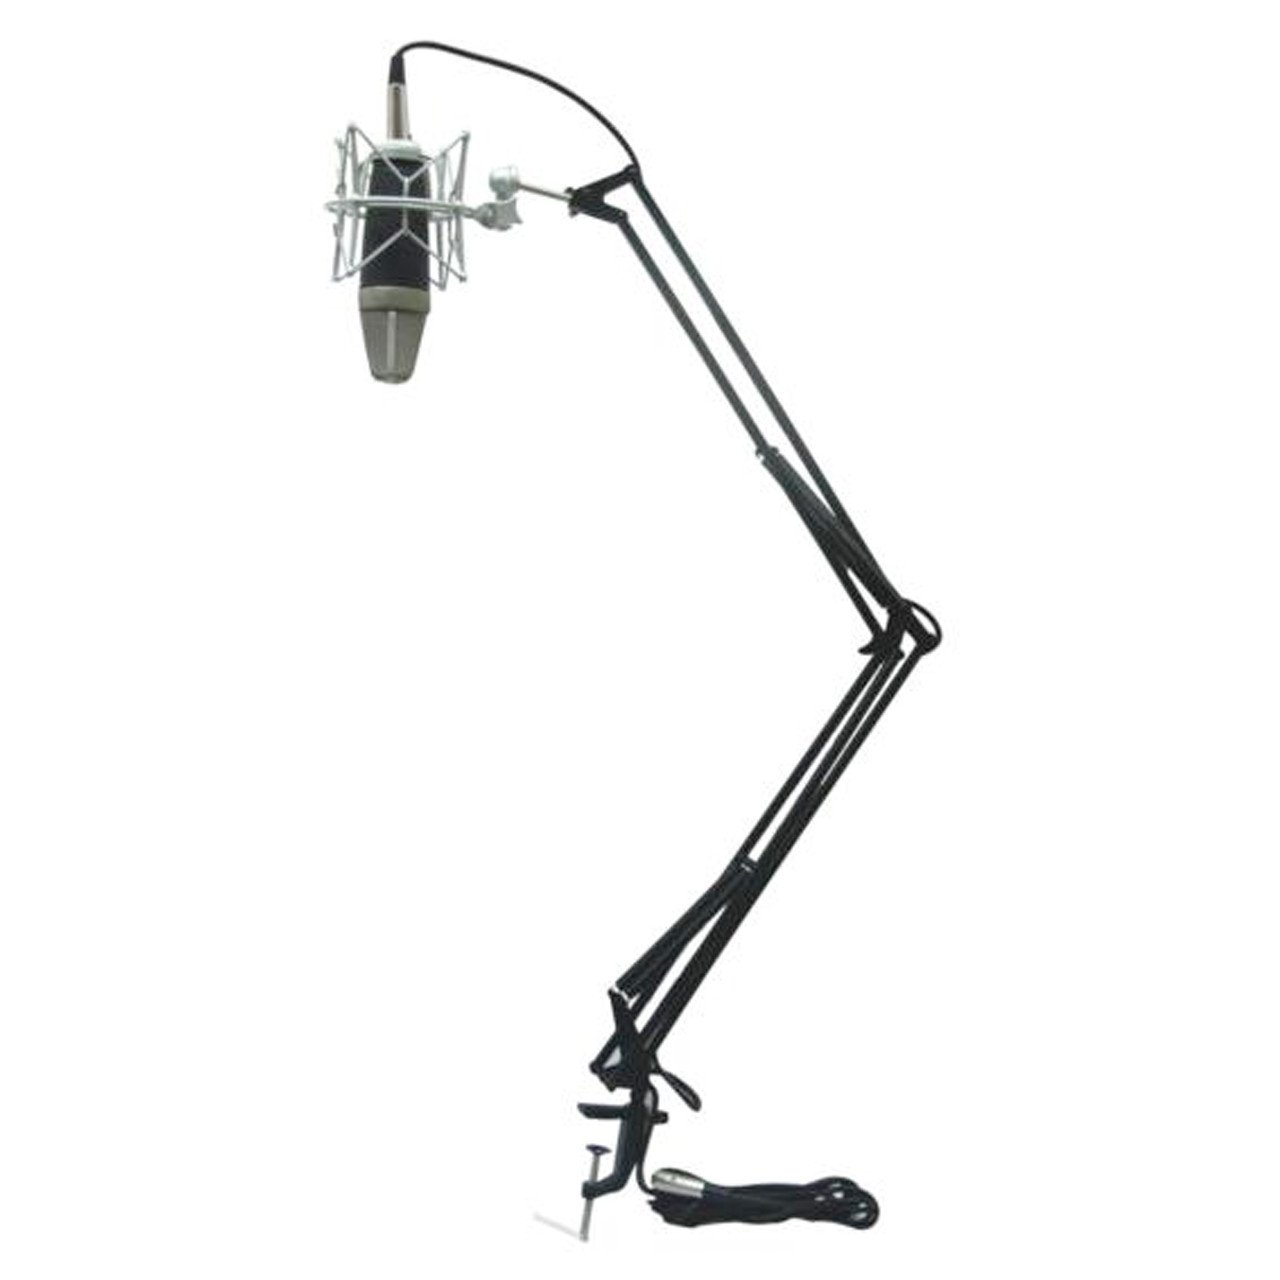 Microphone Accessories - ICON MB-03 Desk Mount Scissor Style Microphone Stand